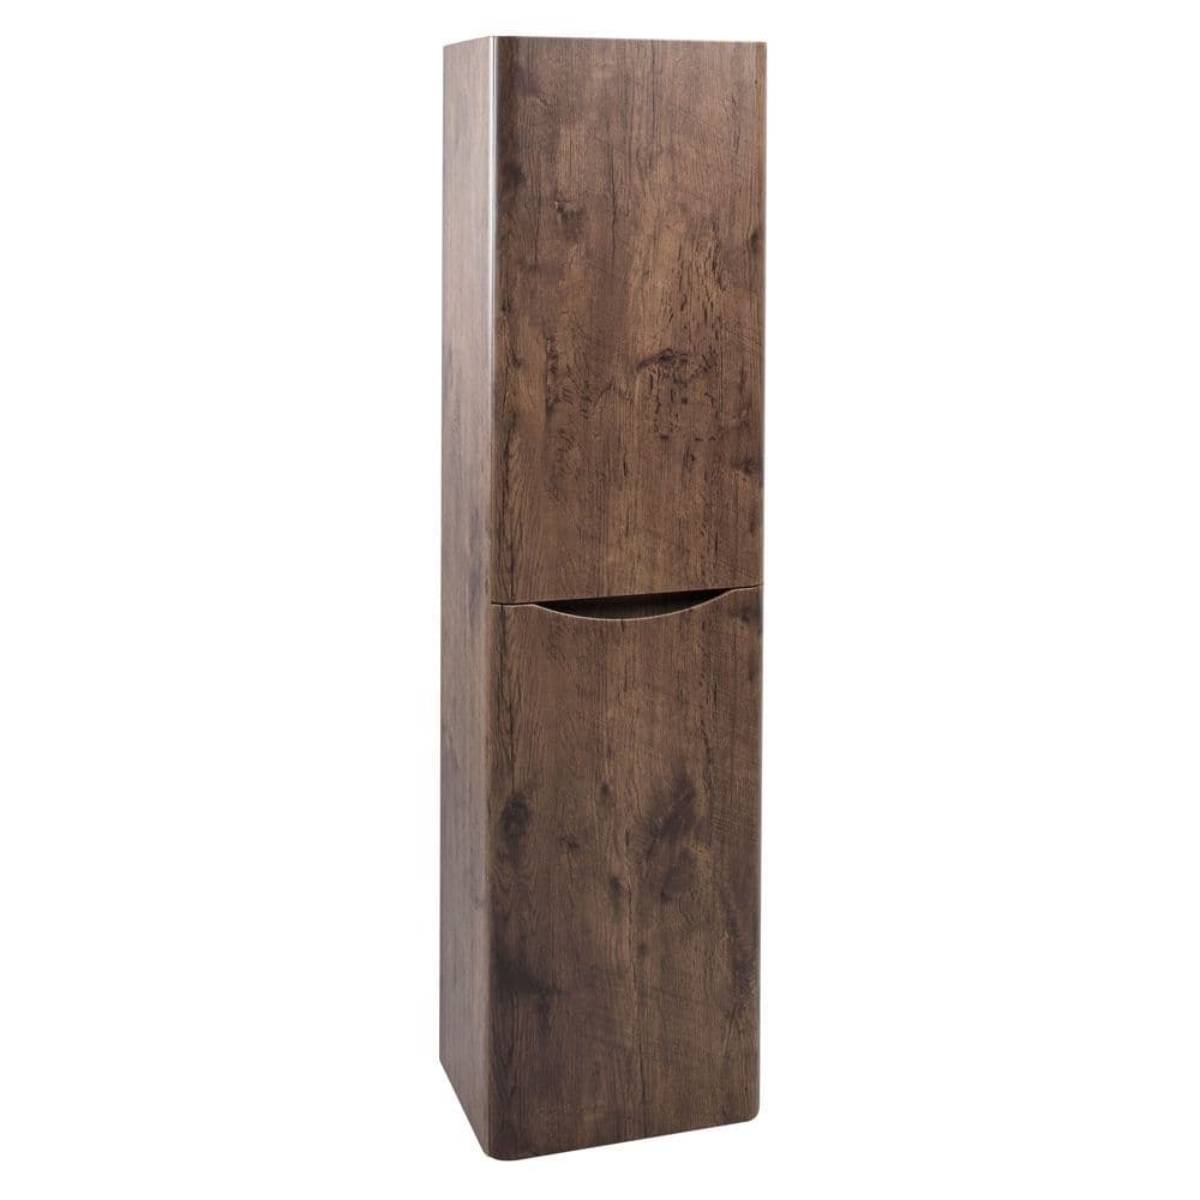 Baltimore 1500mm Wall Mounted Storage Cabinet - Chestnut (7789)